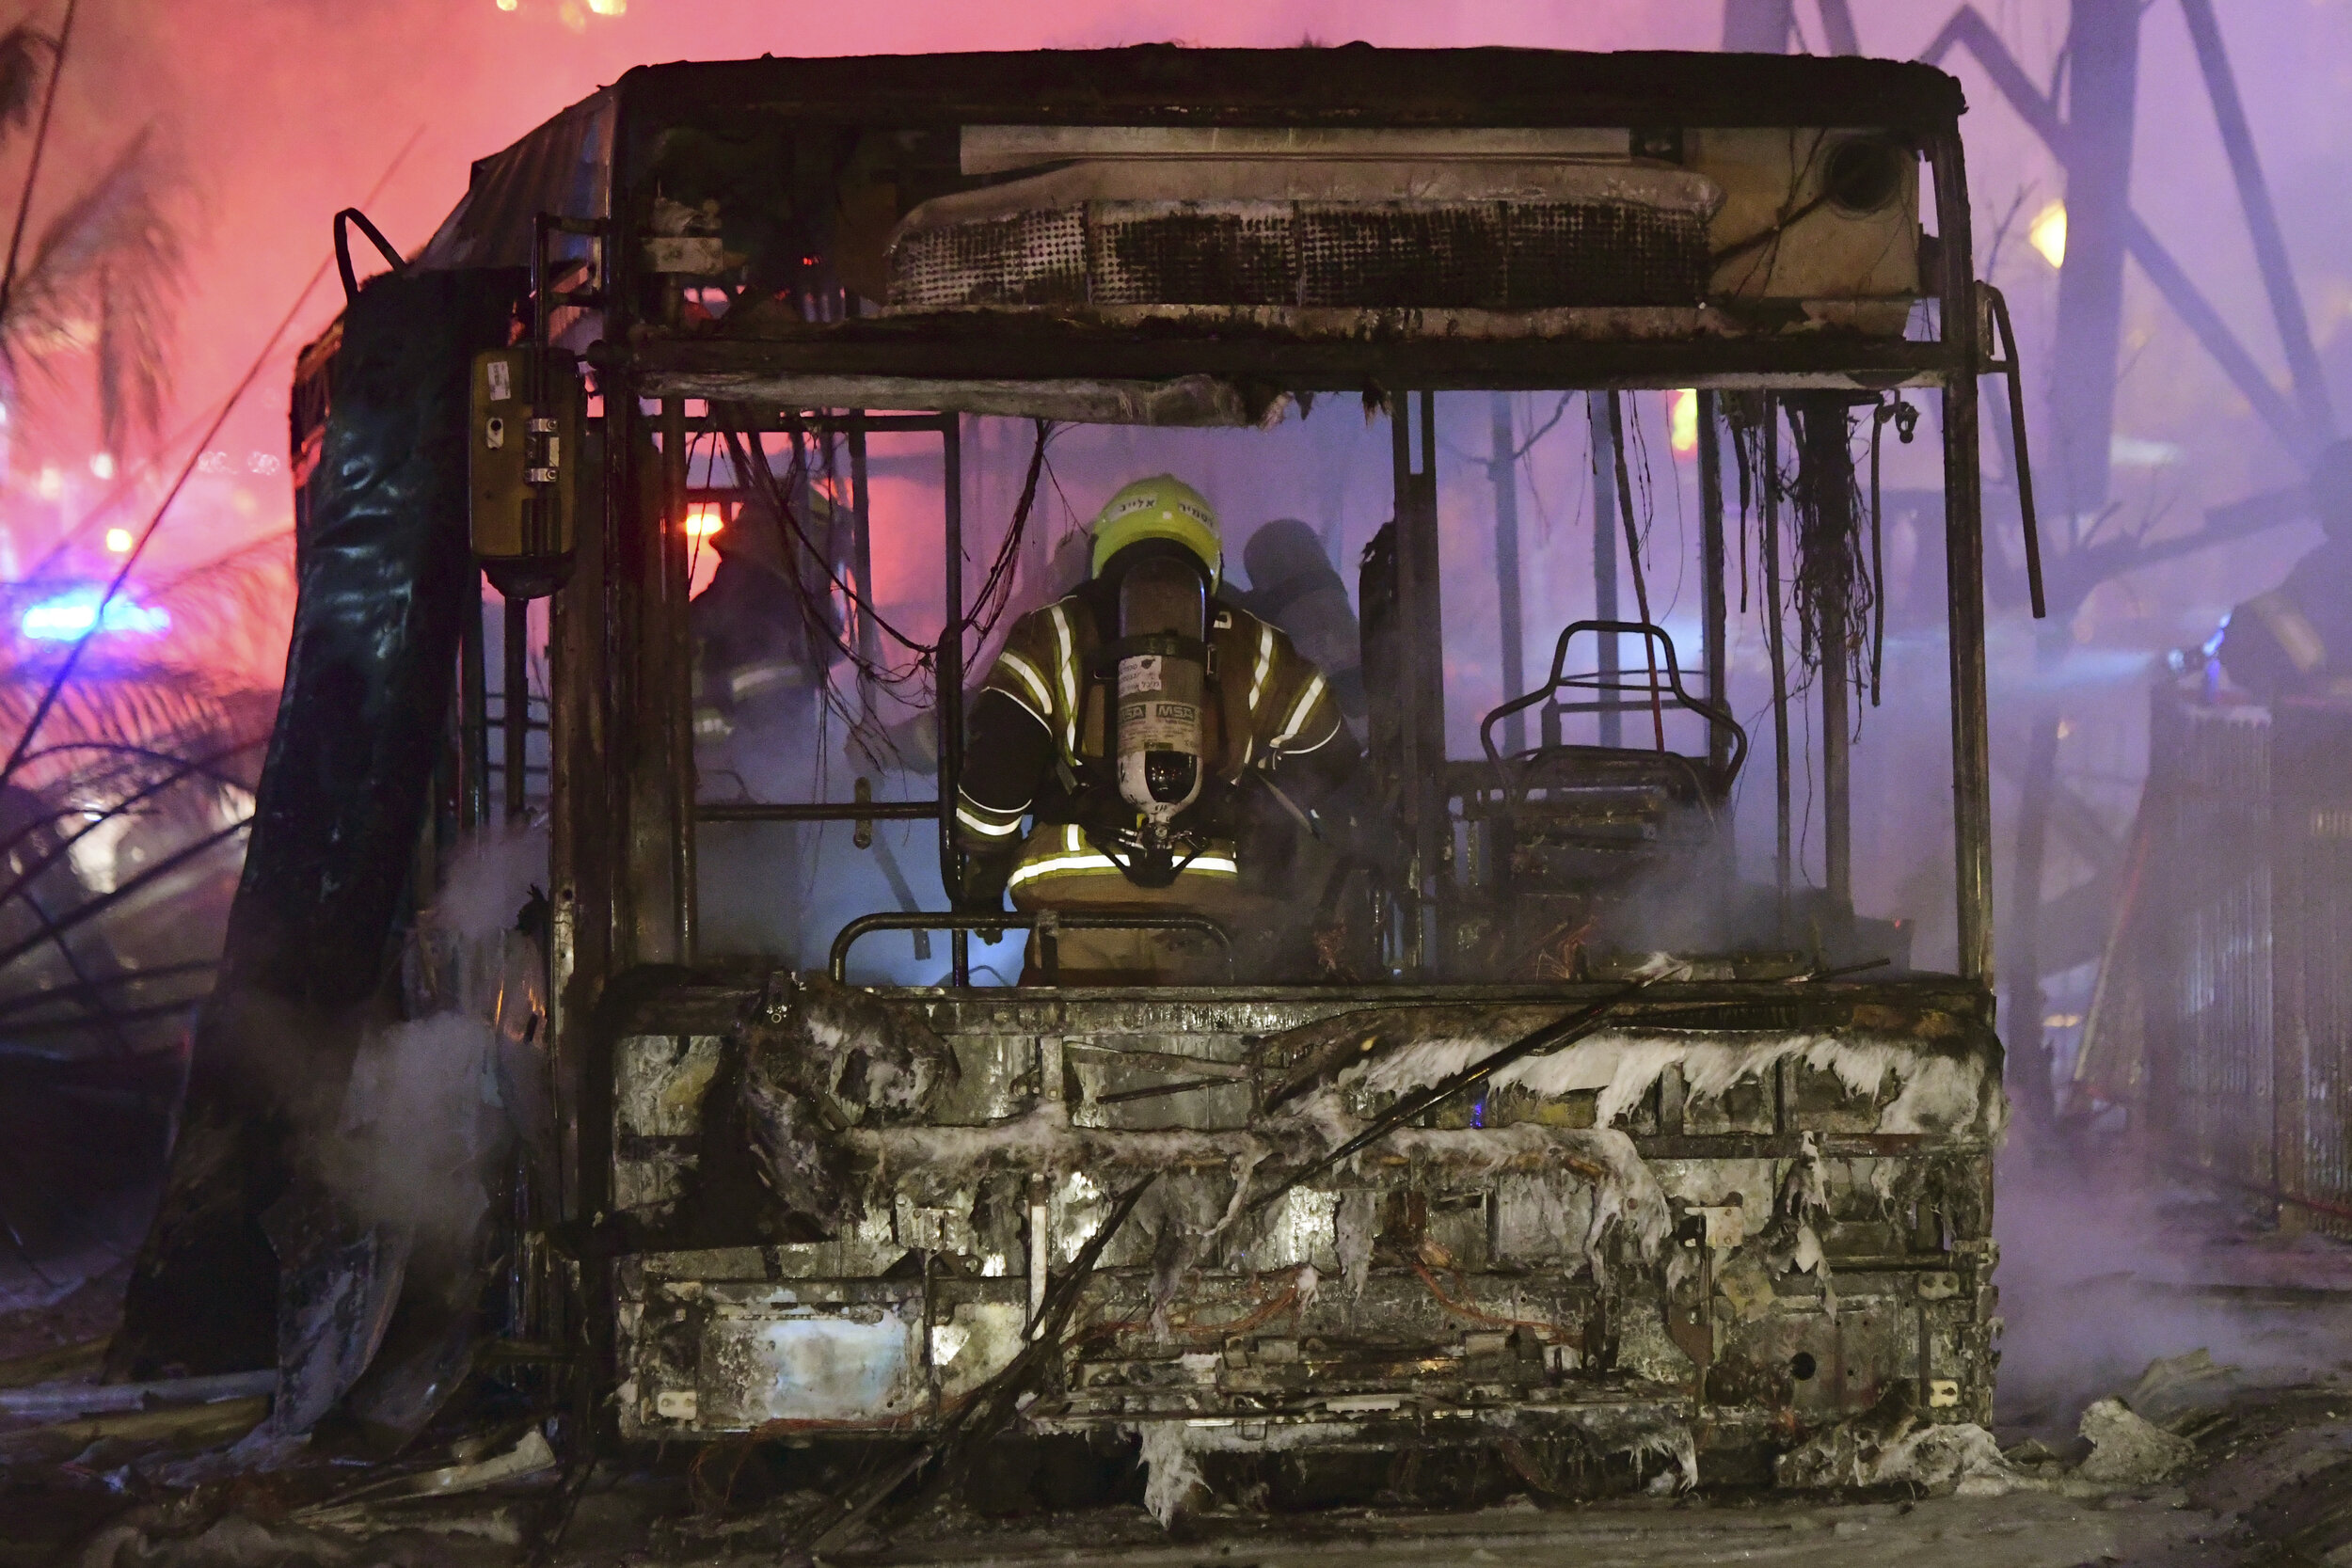  An Israeli firefighter extinguishes a burning bus after it was hit by a rocket fired from the Gaza Strip, at the central Israeli town of Holon, near Tel Aviv, Tuesday, May 11, 2021. (AP Photo/Avshalom Sassoni)  